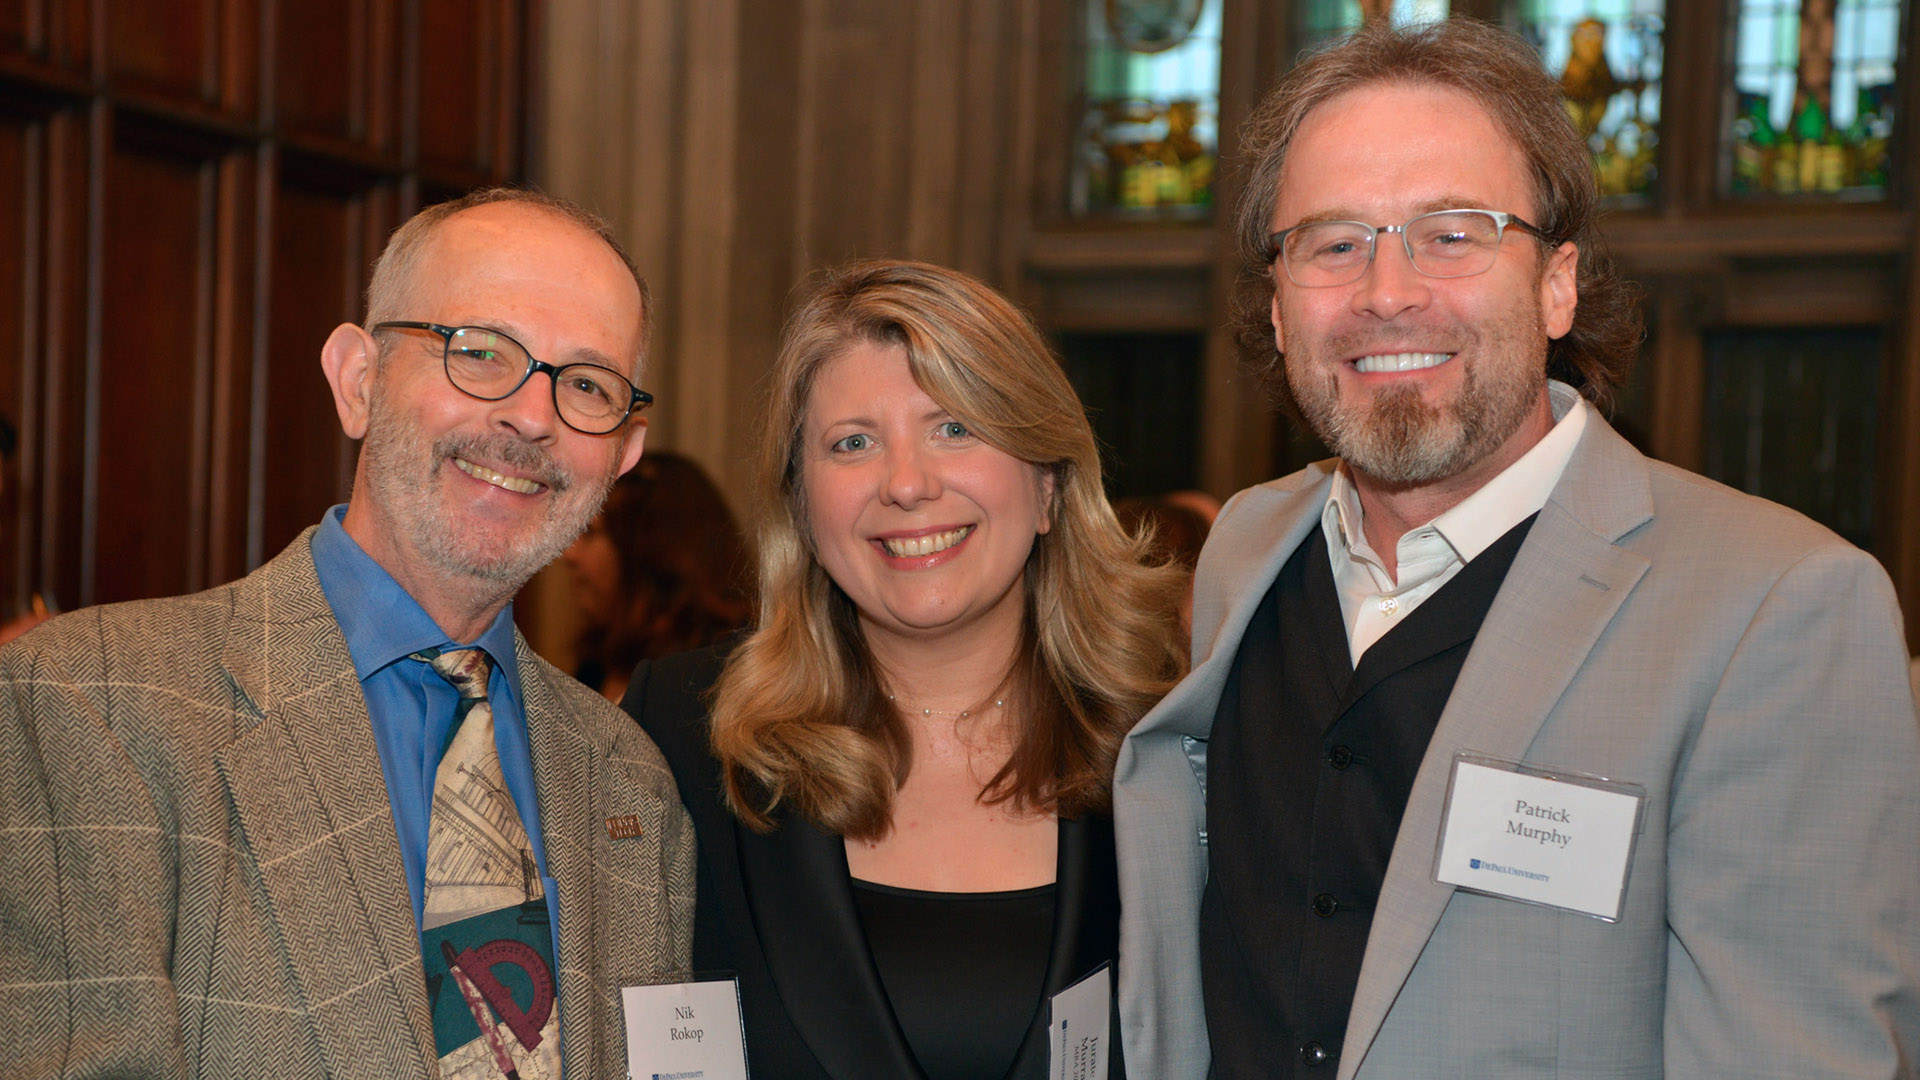 From left to right: Nik Rokop, Coleman Foundation Clinical Associate Professor of Entrepreneurship at IIT; Associate Director of the Kellstadt Marketing Center Jurate Murray; and Patrick Murphy, Goodrich Endowed Chair for Innovation and Entrepreneurship at the University of Alabama and former Driehaus faculty member in entrepreneurship.